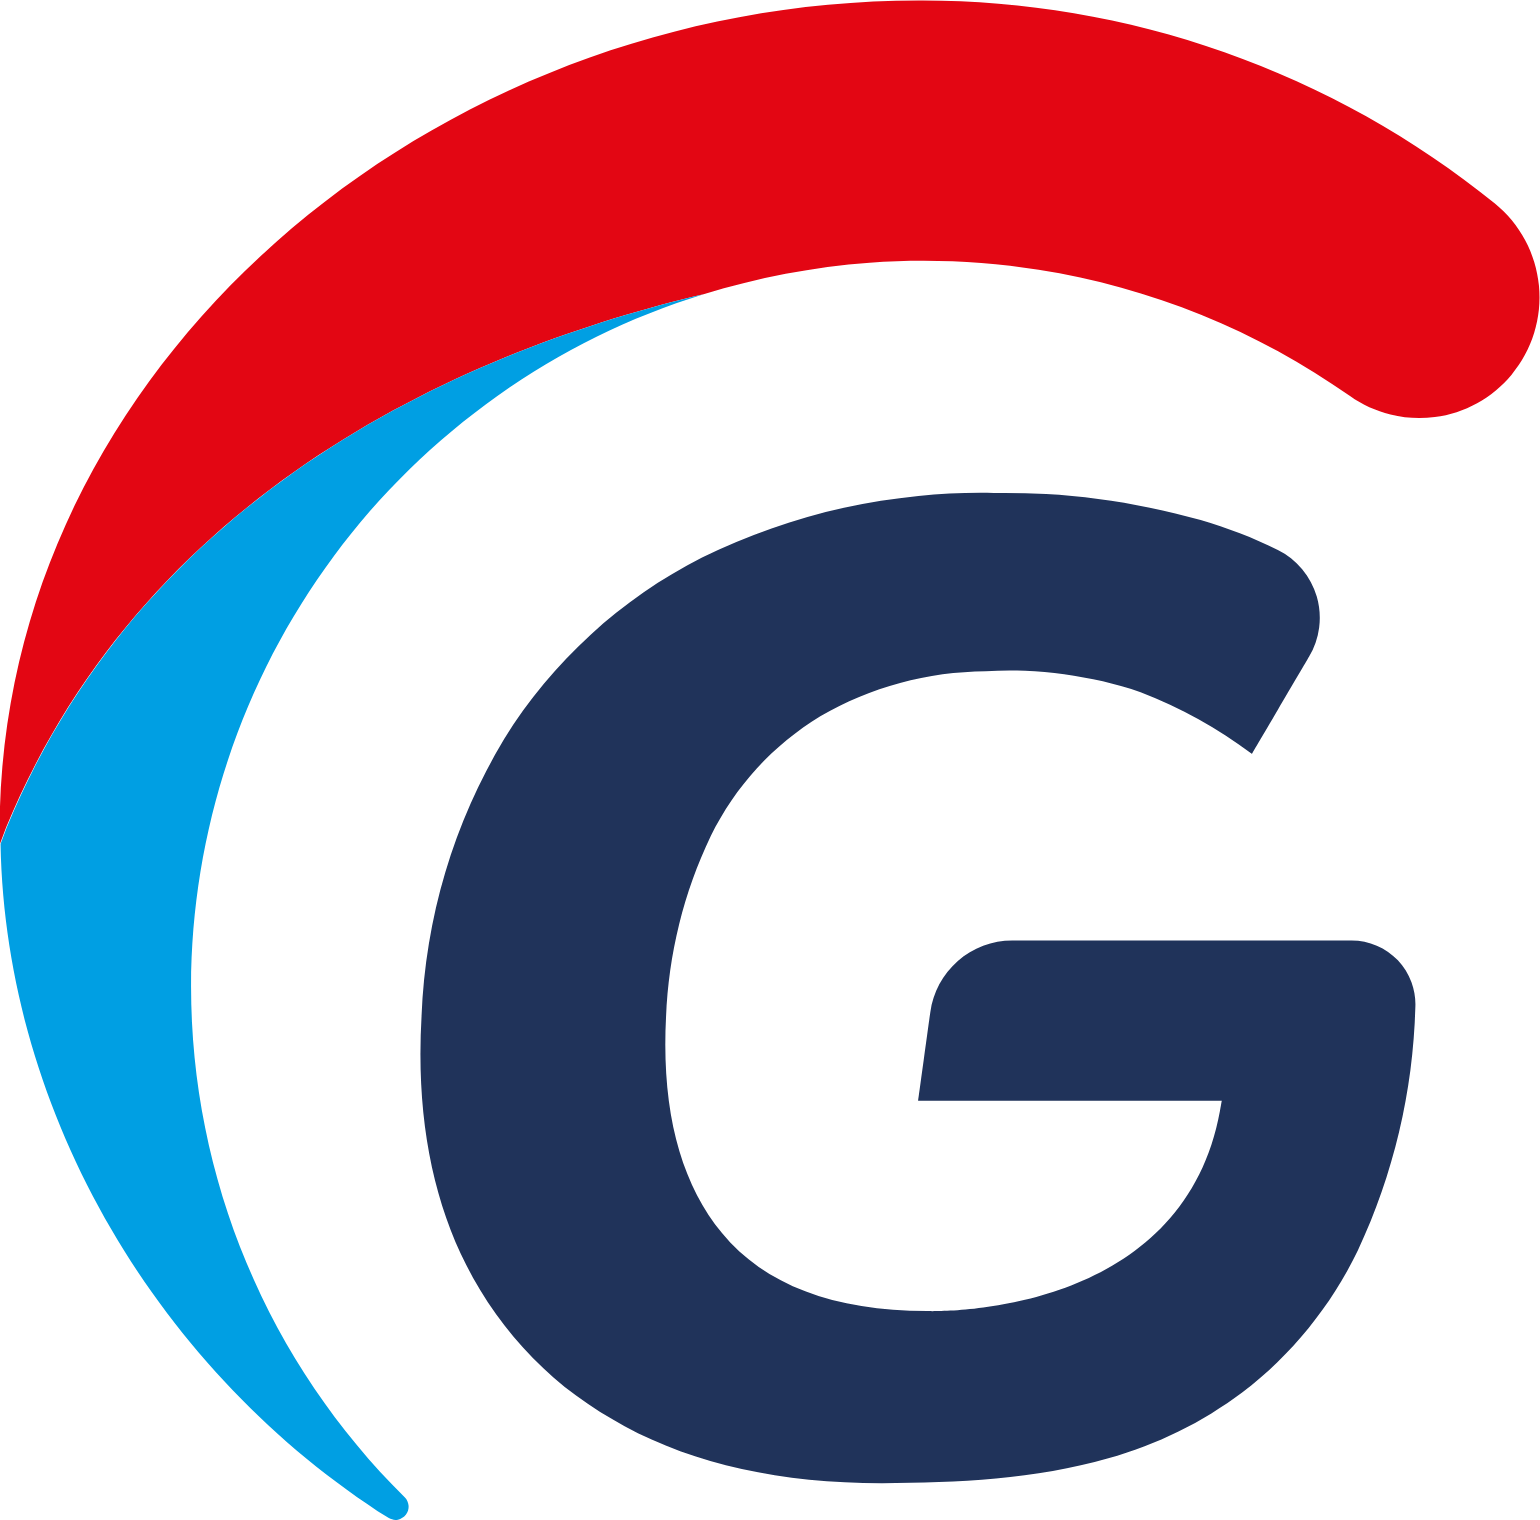 Global Power Synergy logo (transparent PNG)